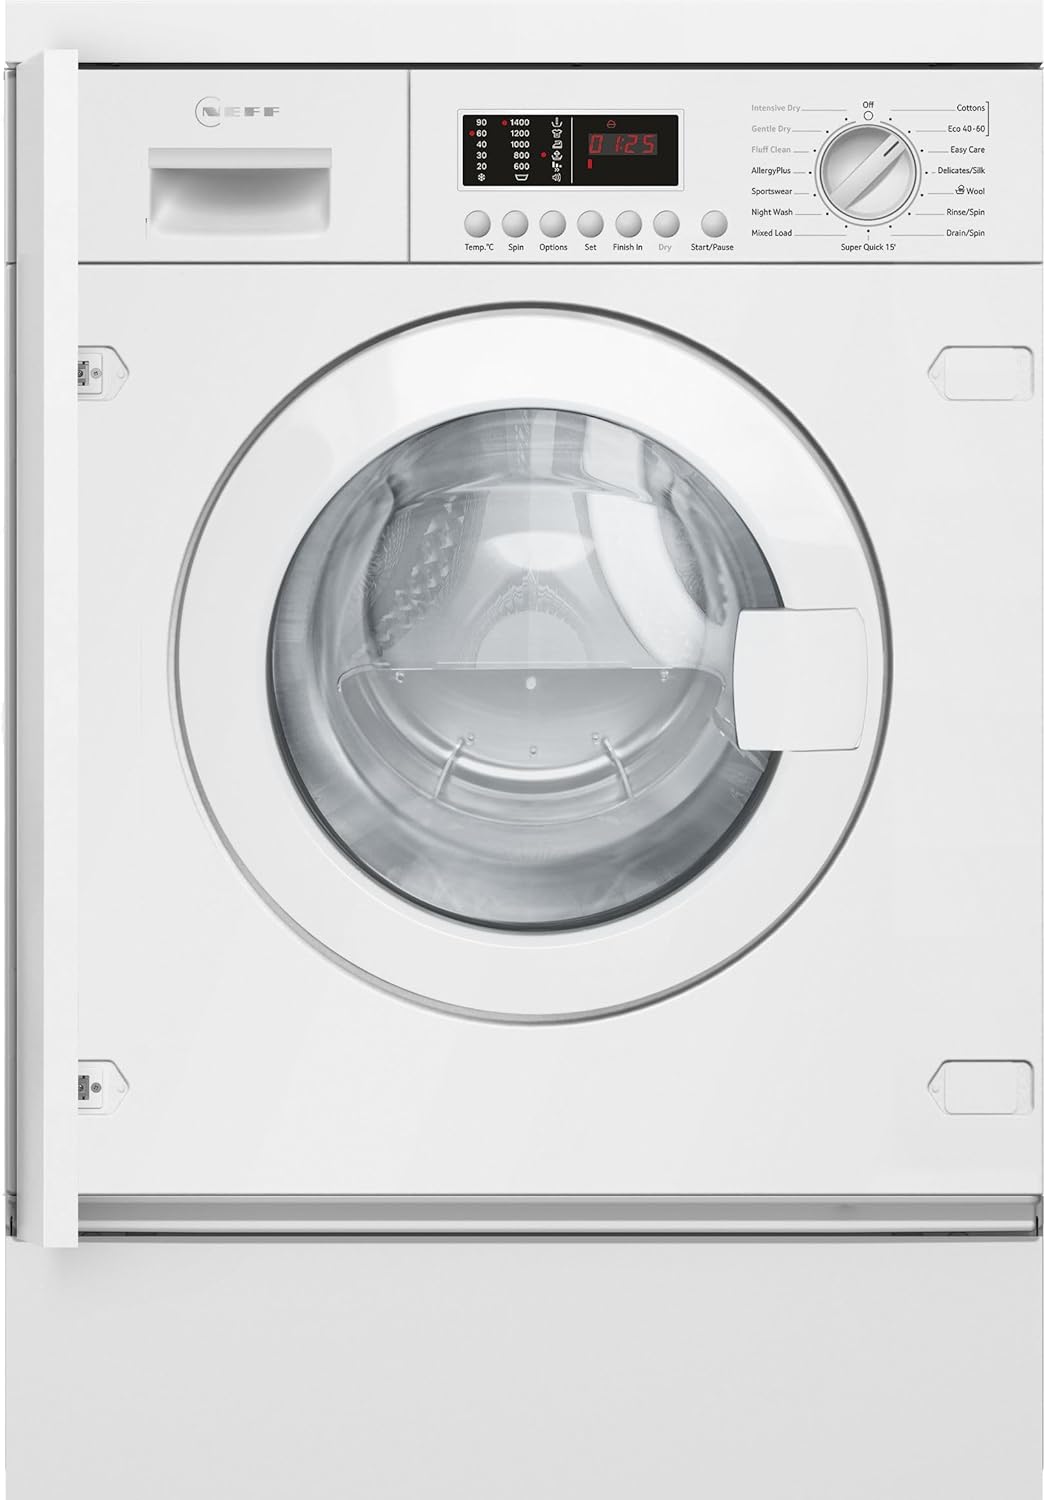 NEFF V6540X3GB Washer Dryer with 7kg Washing Capacity, 4kg Drying Capacity, Large LED Display, White, Built in - Amazing Gadgets Outlet